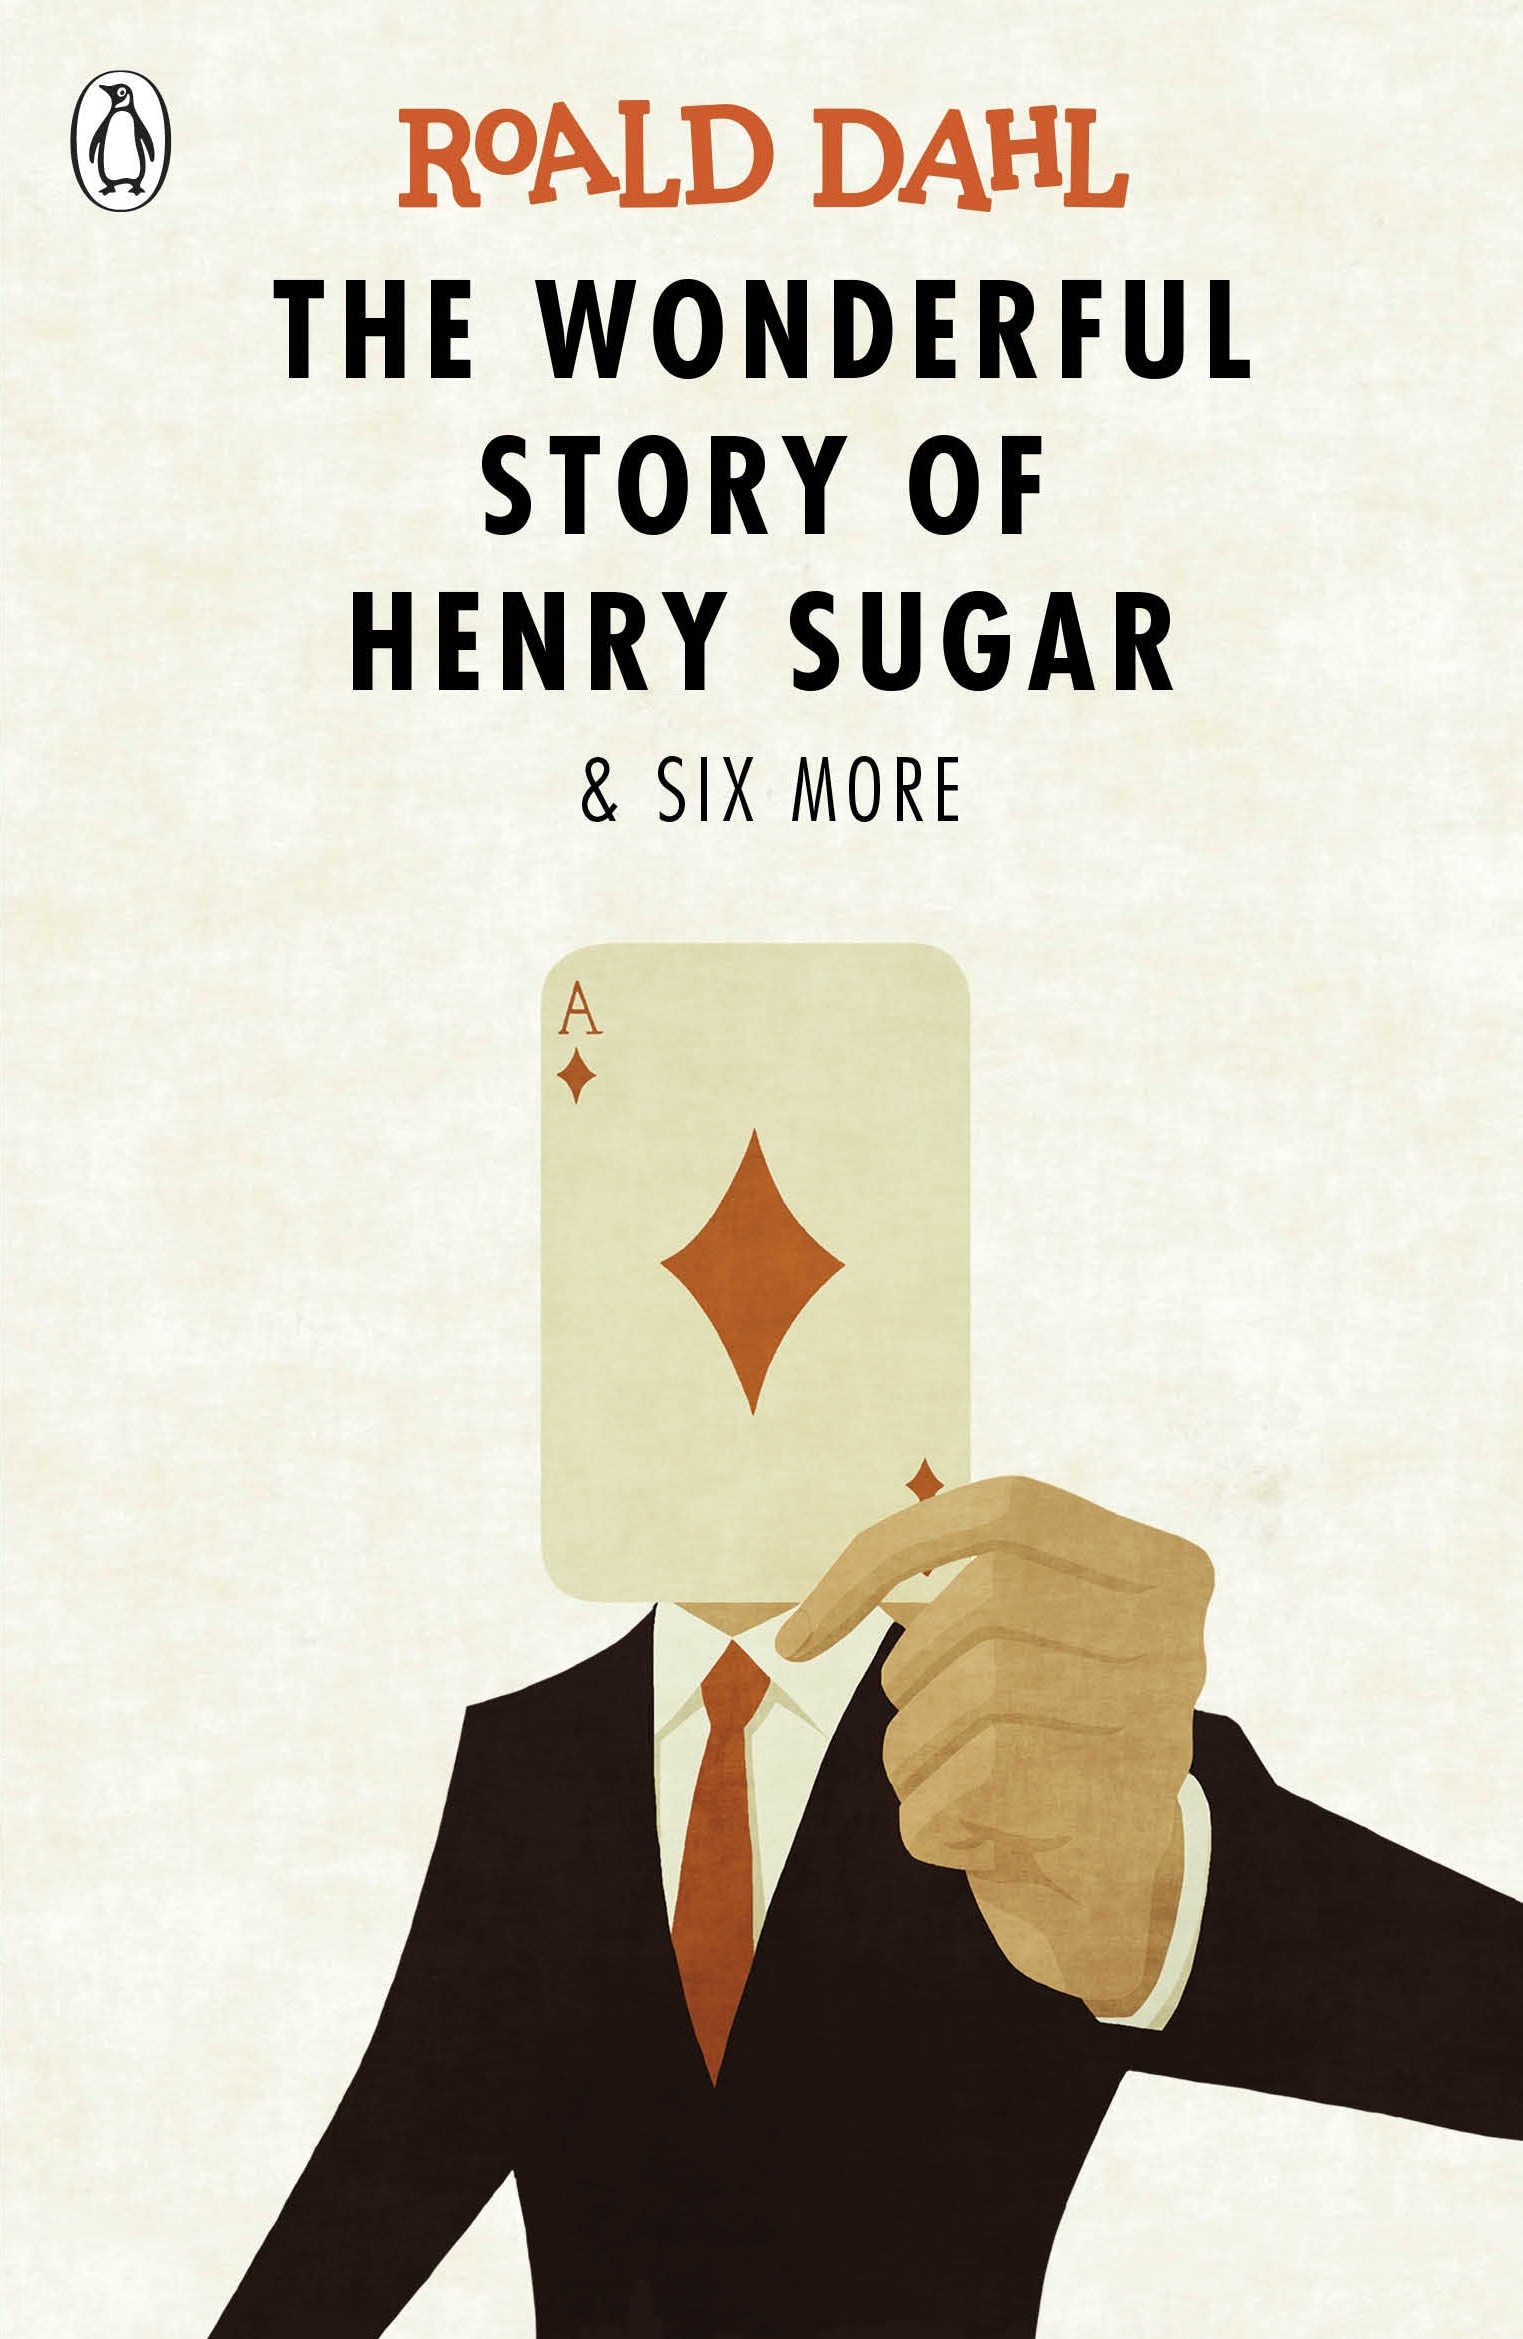 Book “The Wonderful Story of Henry Sugar and Six More” by Roald Dahl — May 4, 2017